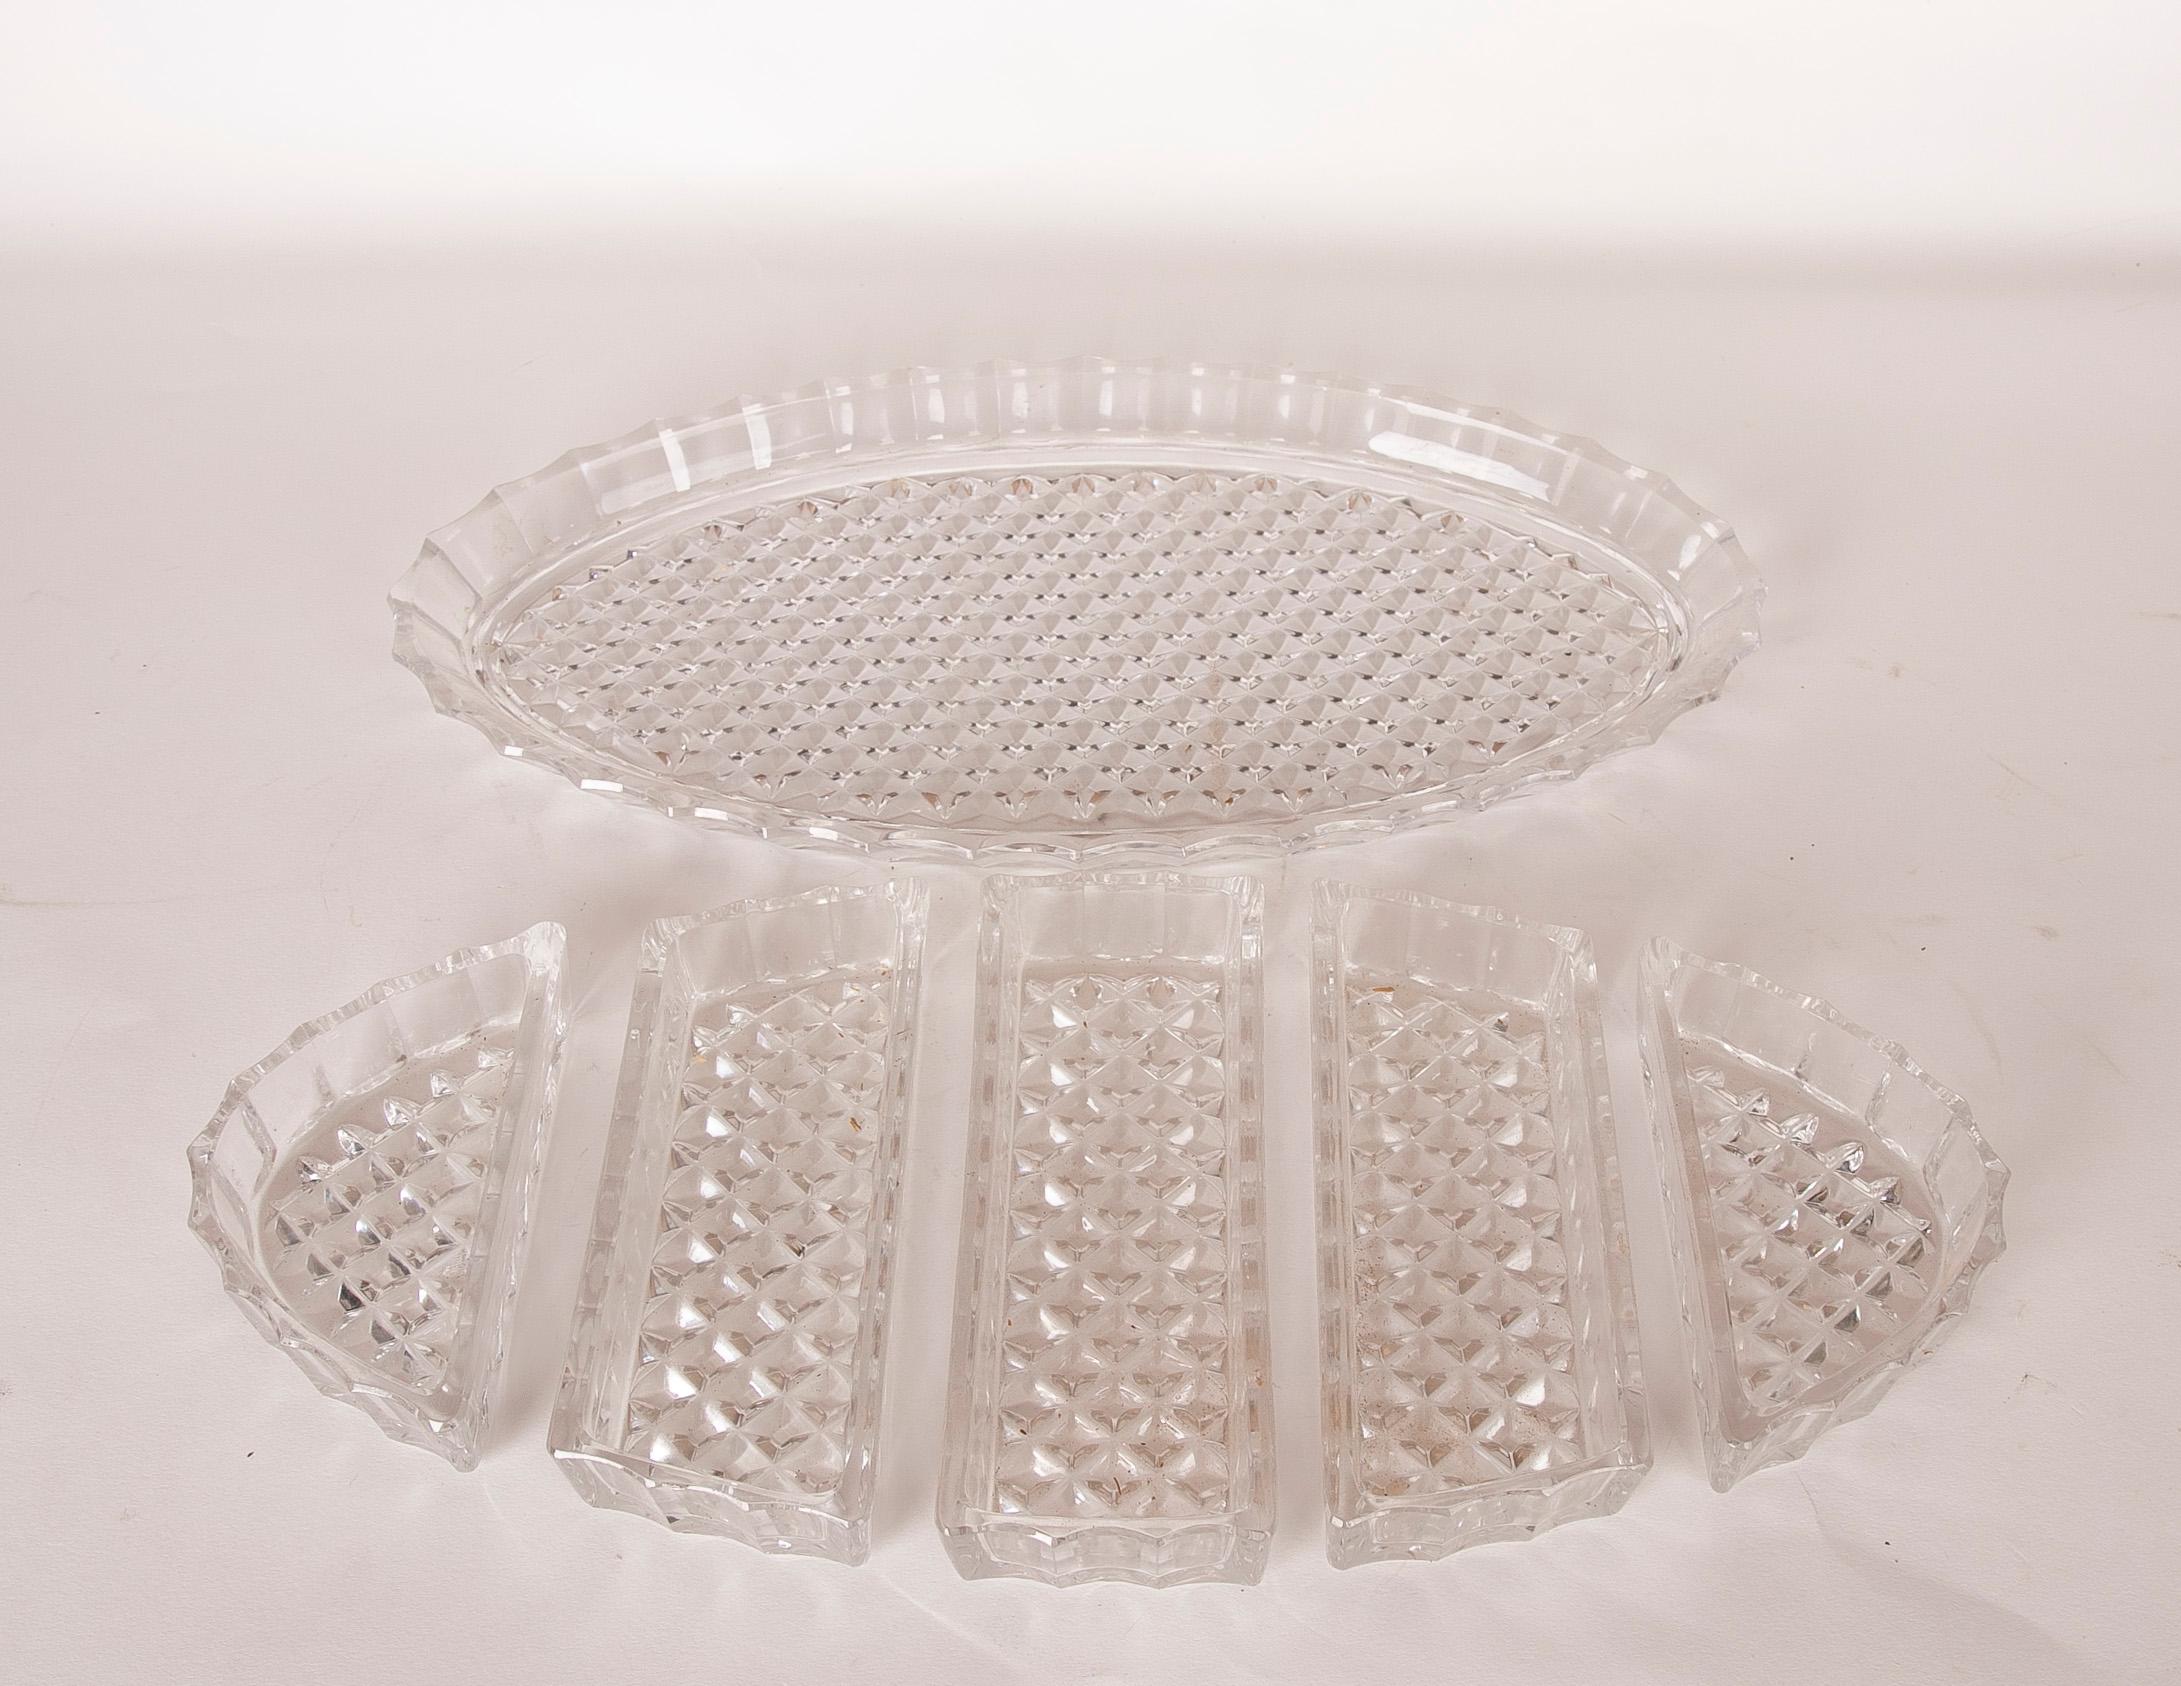 Carved Glass Tray with Individual Containers on the Tray For Sale 4